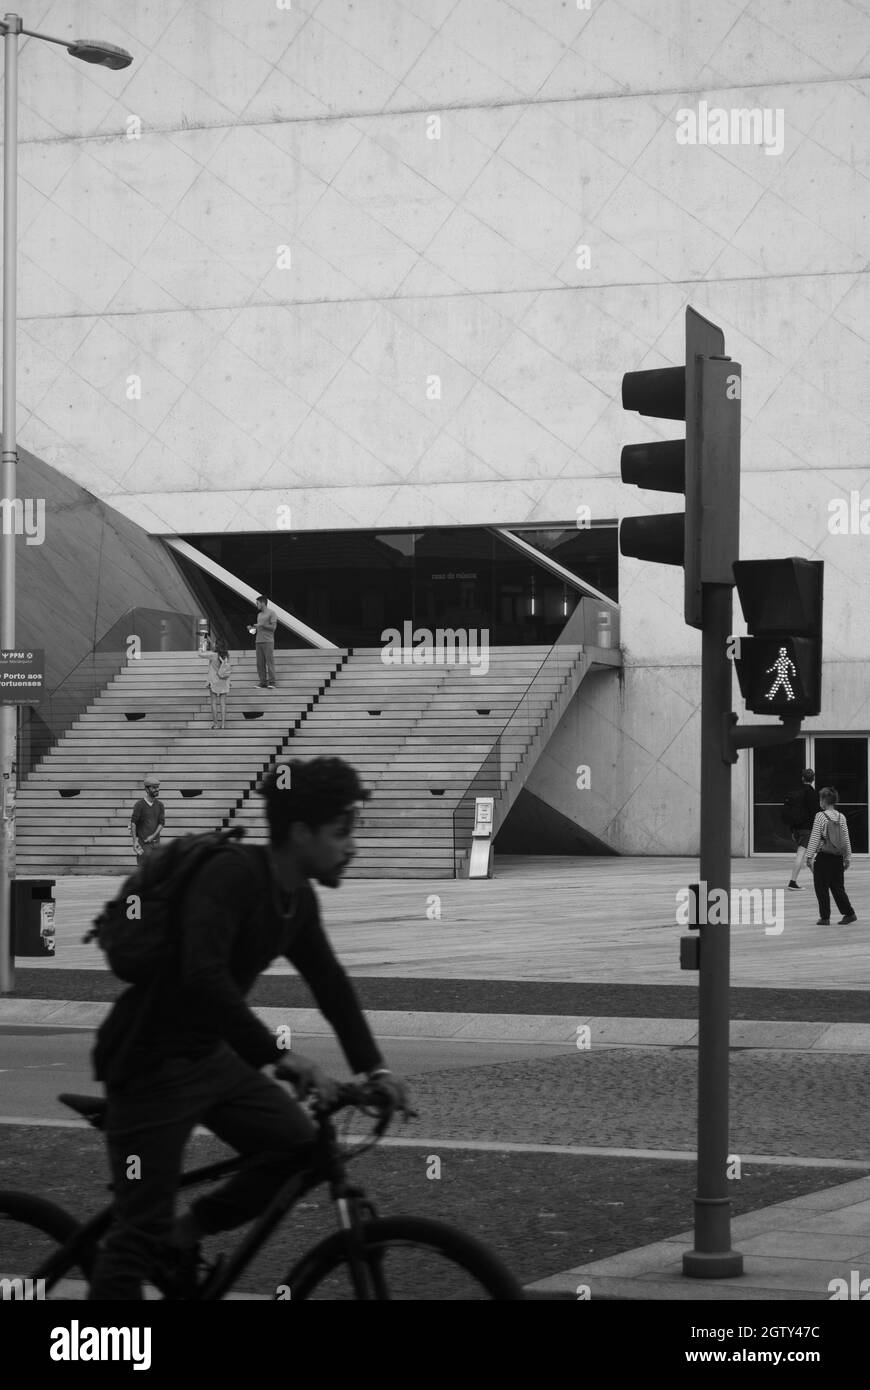 Urban lifestyle in monochrome - Modern building and a cyclist passing by in a blur, a traffic light and city road - Black and white street photo Stock Photo